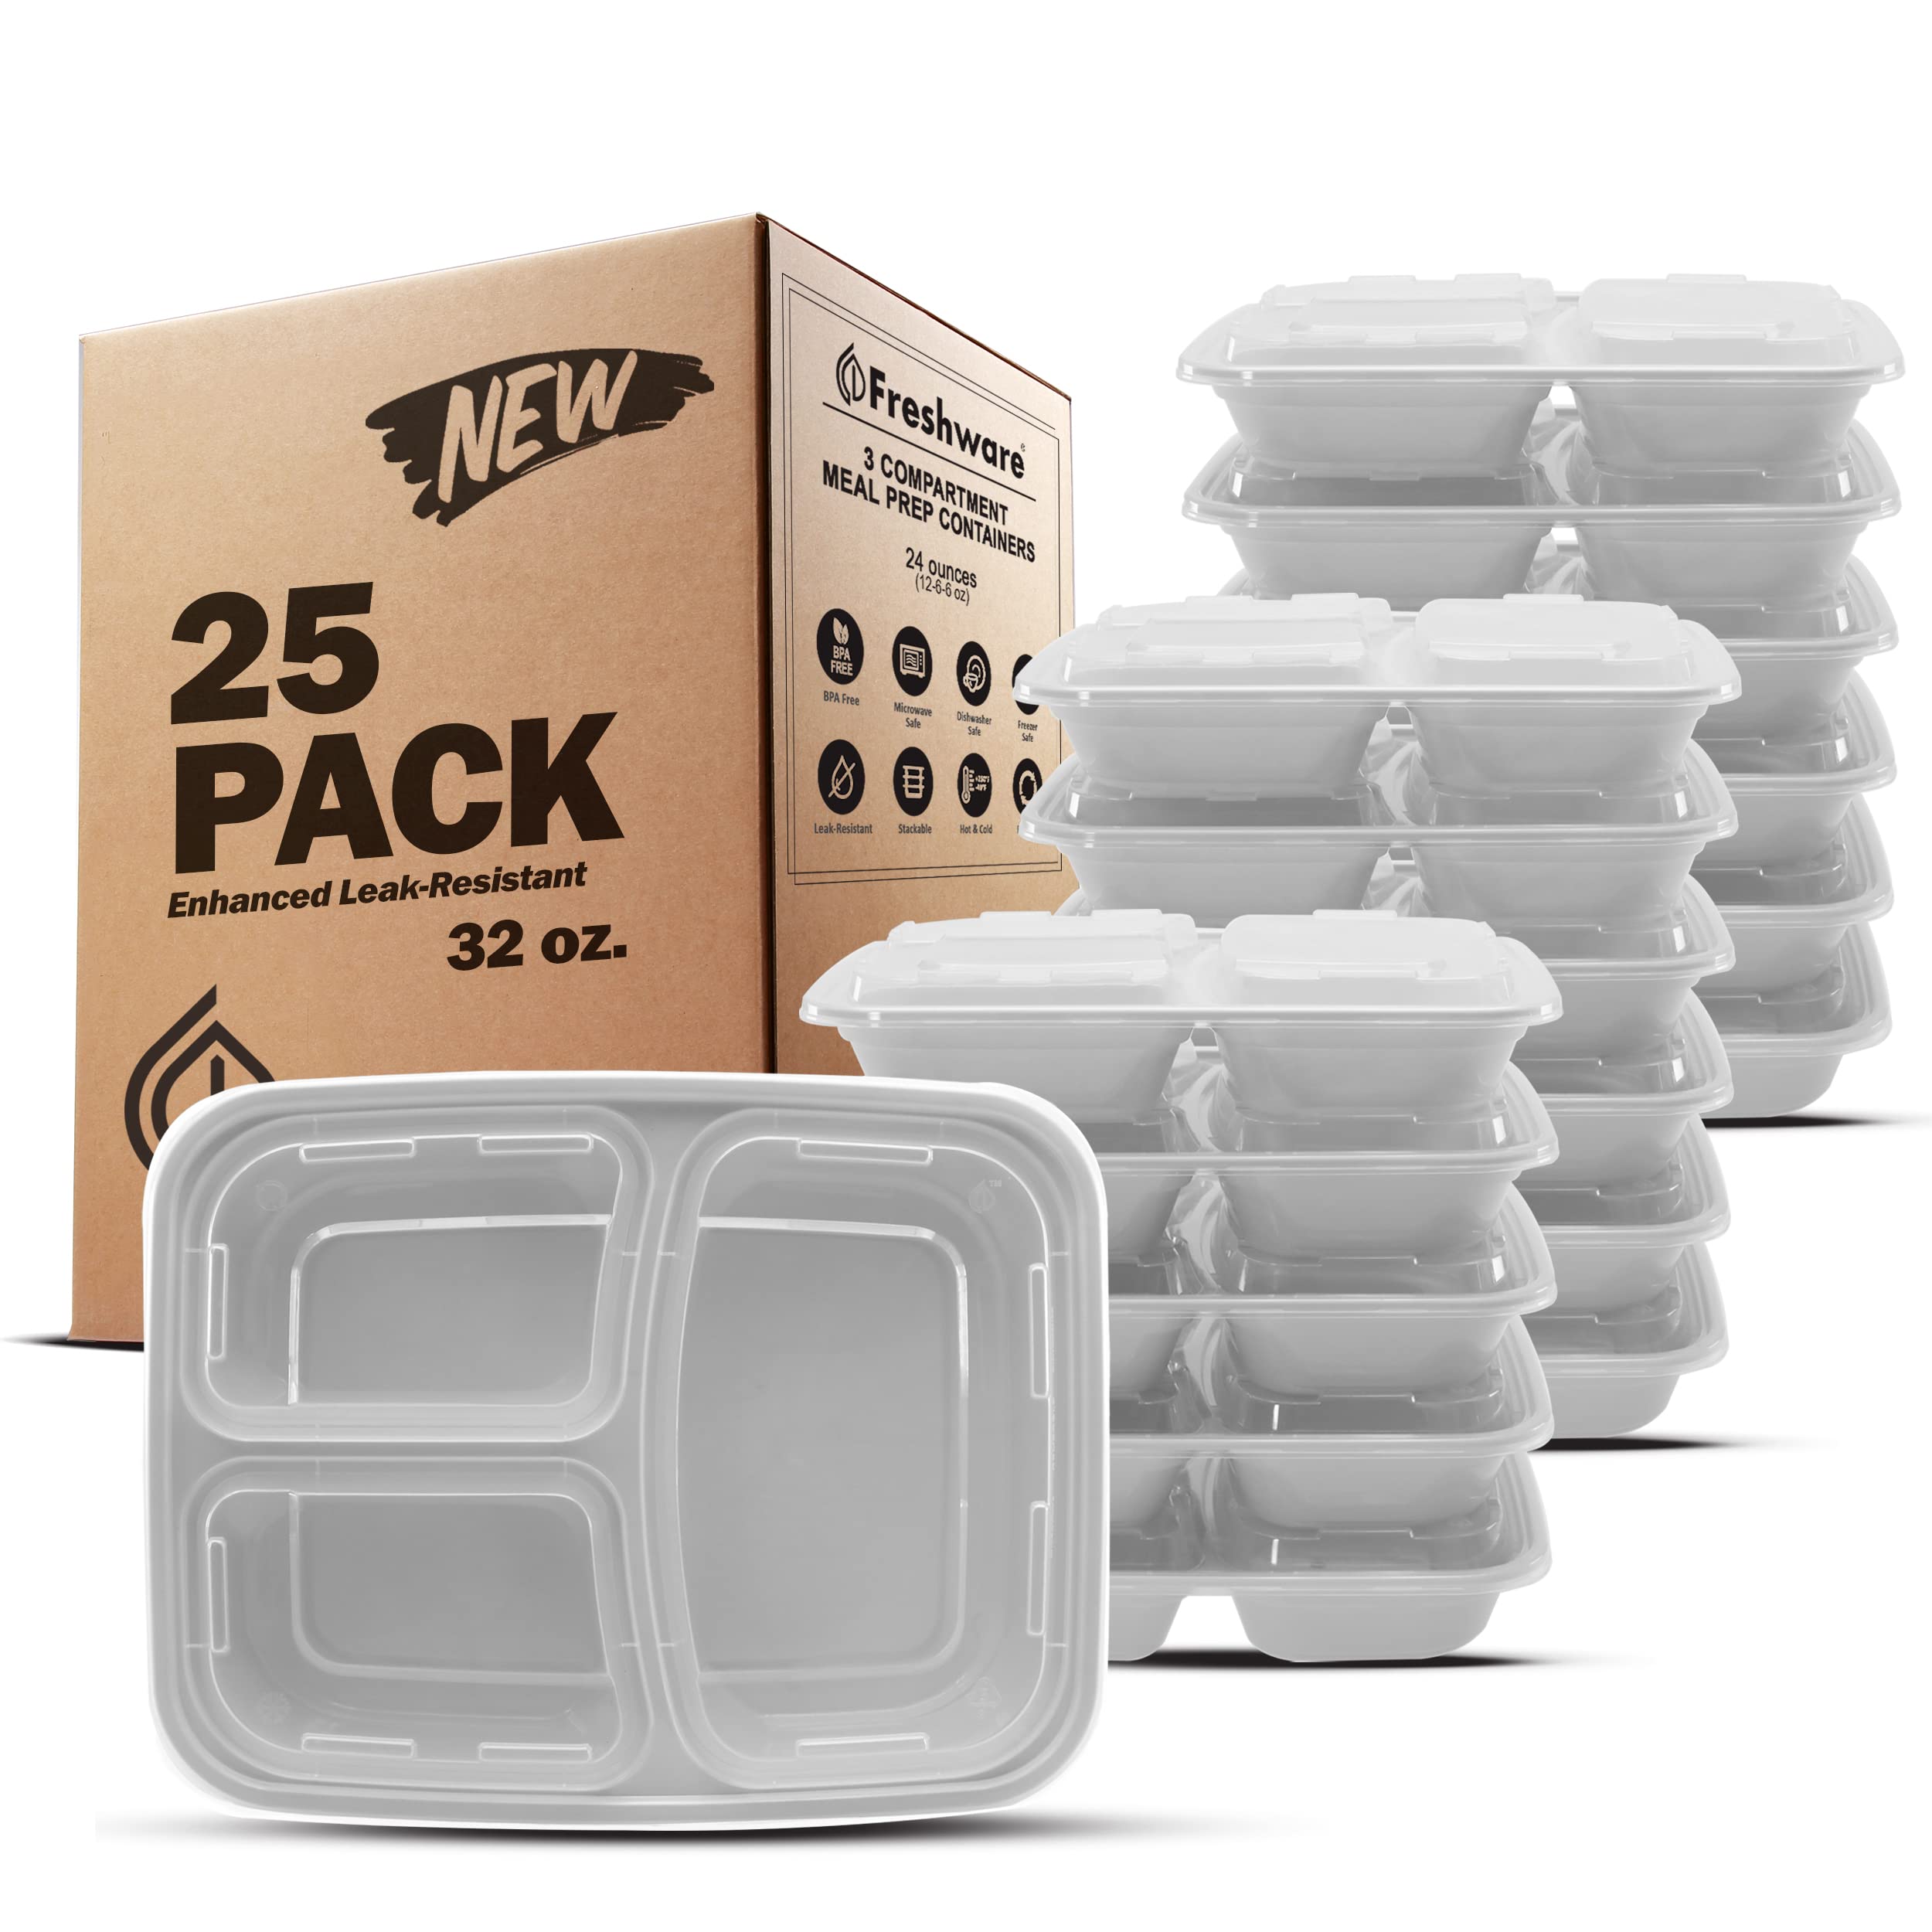 Freshware Meal Prep Containers 3 Compartment with Lids, Food Storage Containers, Bento Box, Stackable & Meal Prep Containers 2 Compartment with Lids, Food Storage Containers, Grey